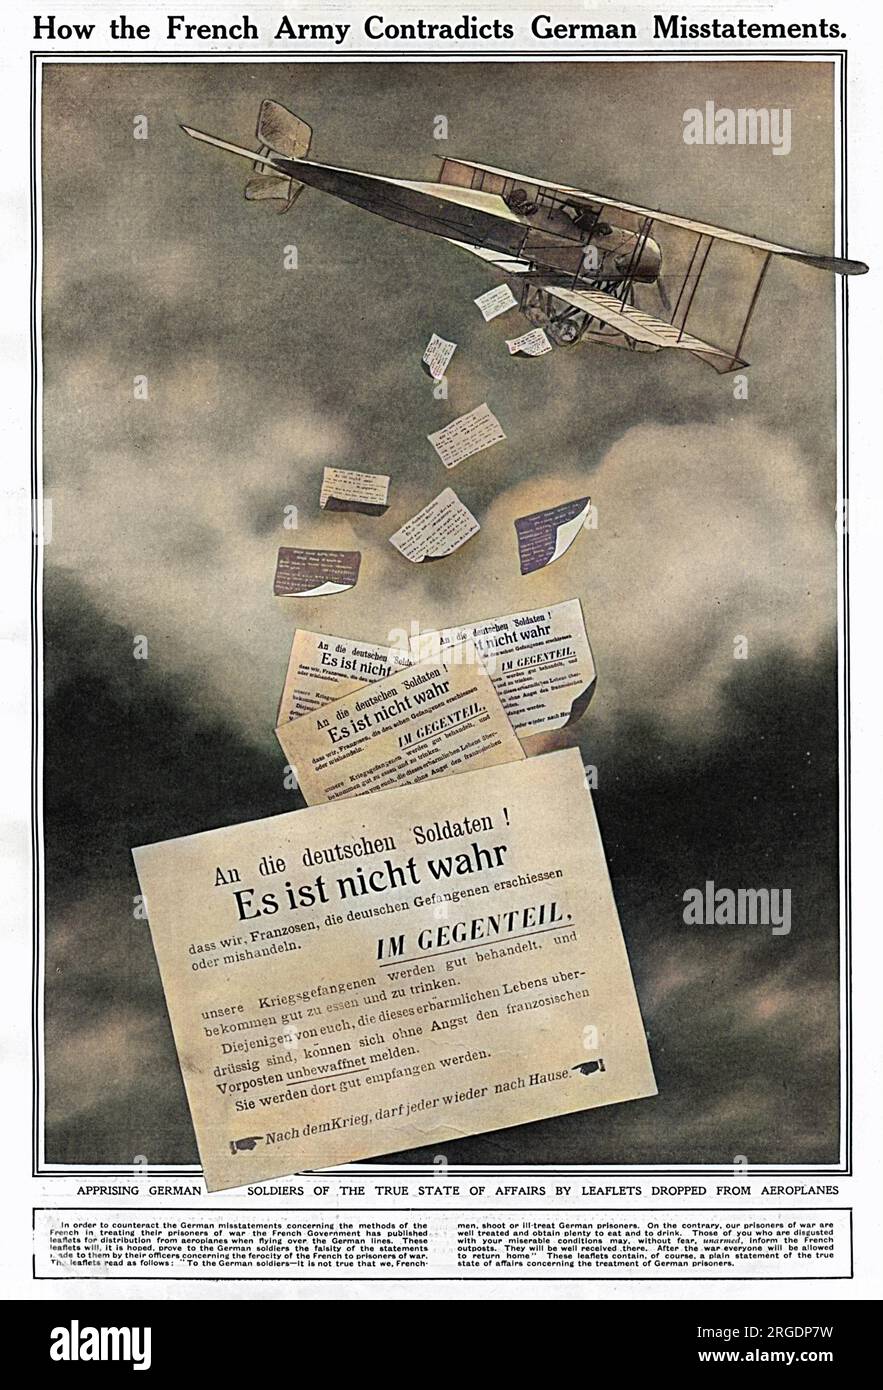 How the French army contradicts German misstatements. A French biplane drops leaflets over German land hoping to prove to the German soldiers the falsity of the statements made to them by their officers concerning the ferocity of the French to prisoners of war: To the German soldiers - it is not true that we, Frenchmen, shoot of ill-treat German prisoners ... The leaflets also exhort Germans to give themselves up as they will be well-received and be allowed to return home after the war. Stock Photo